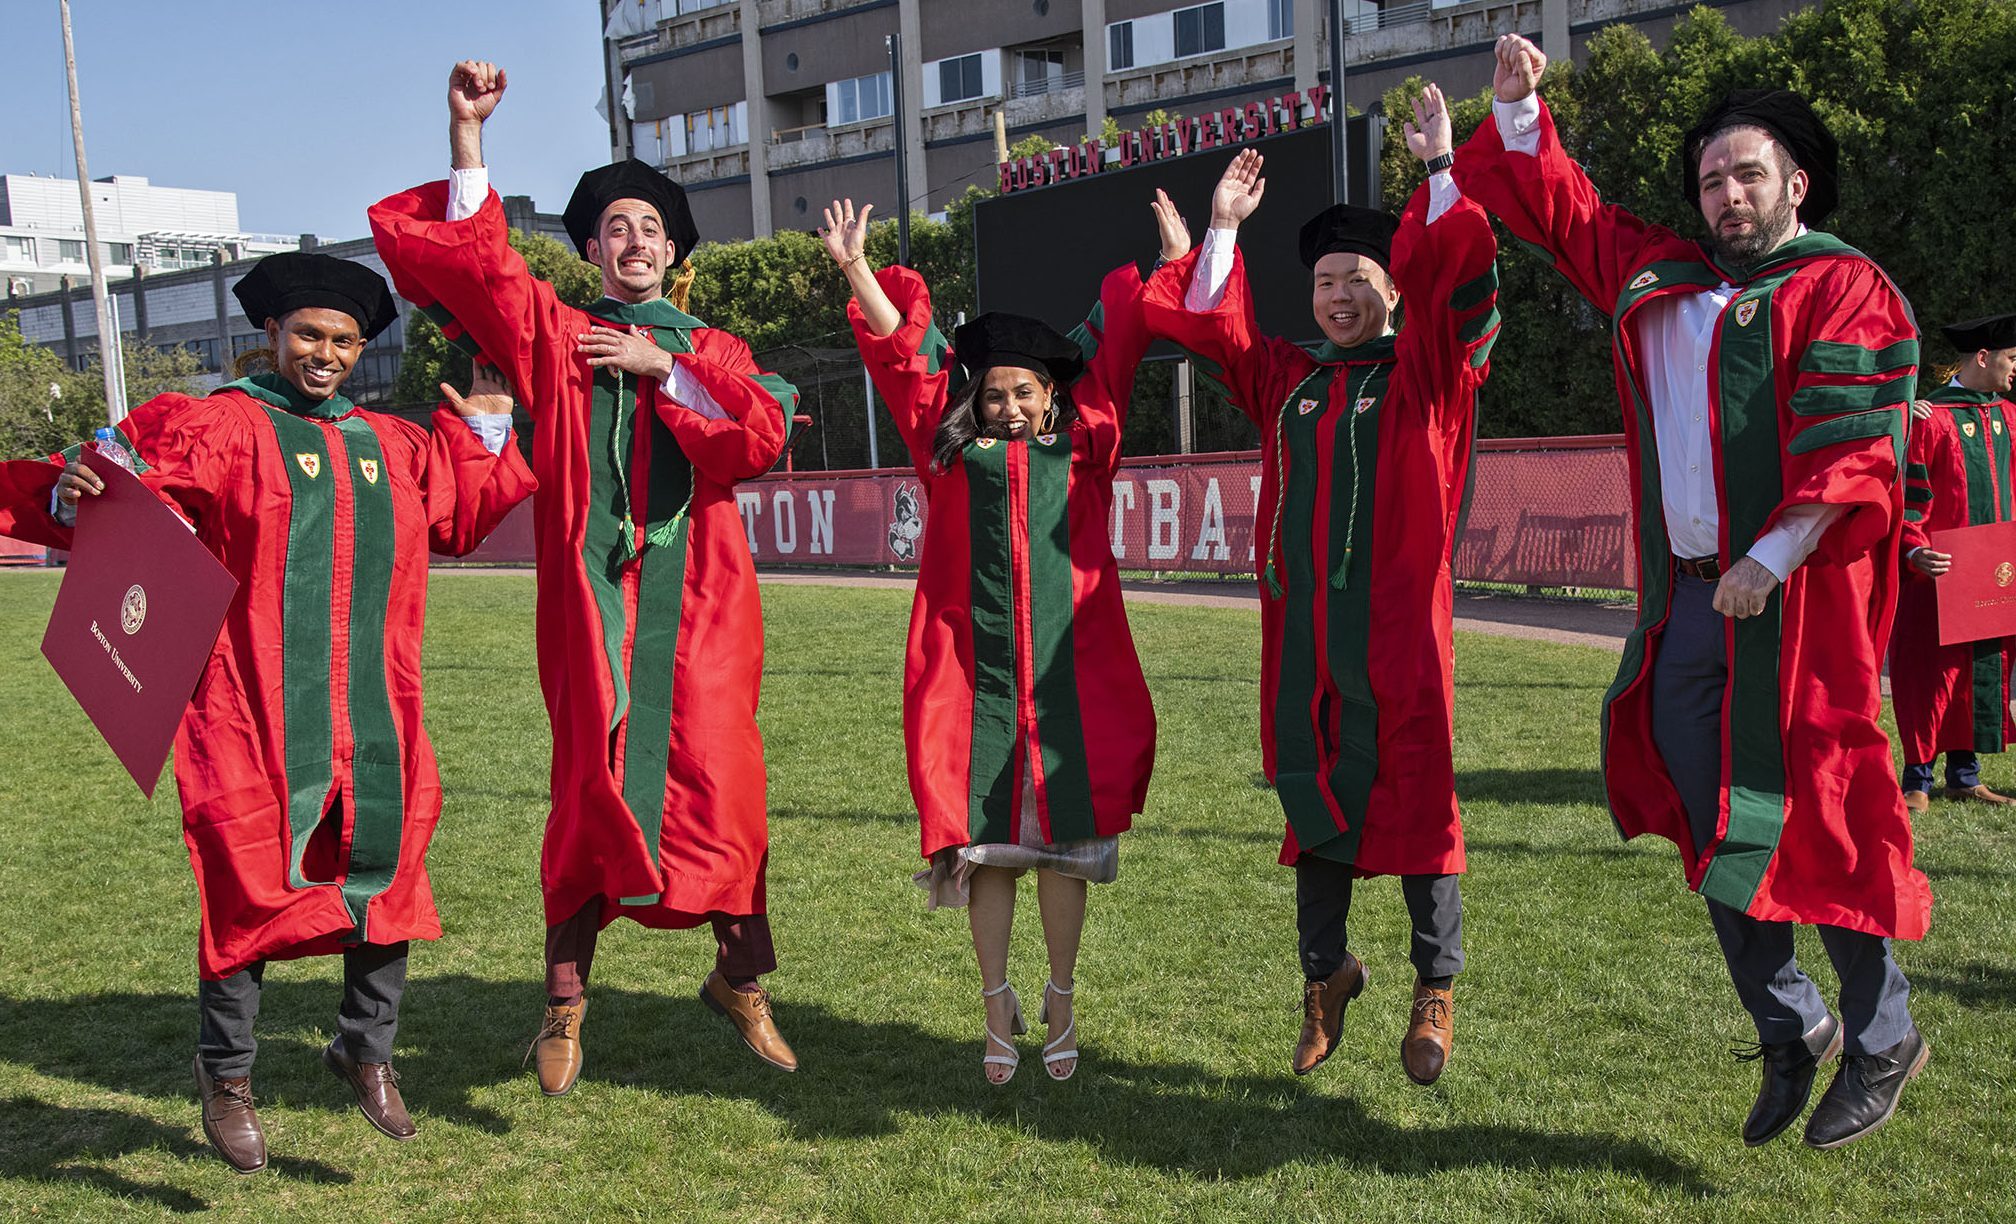 MD grads jumping on field after convocation ceremony